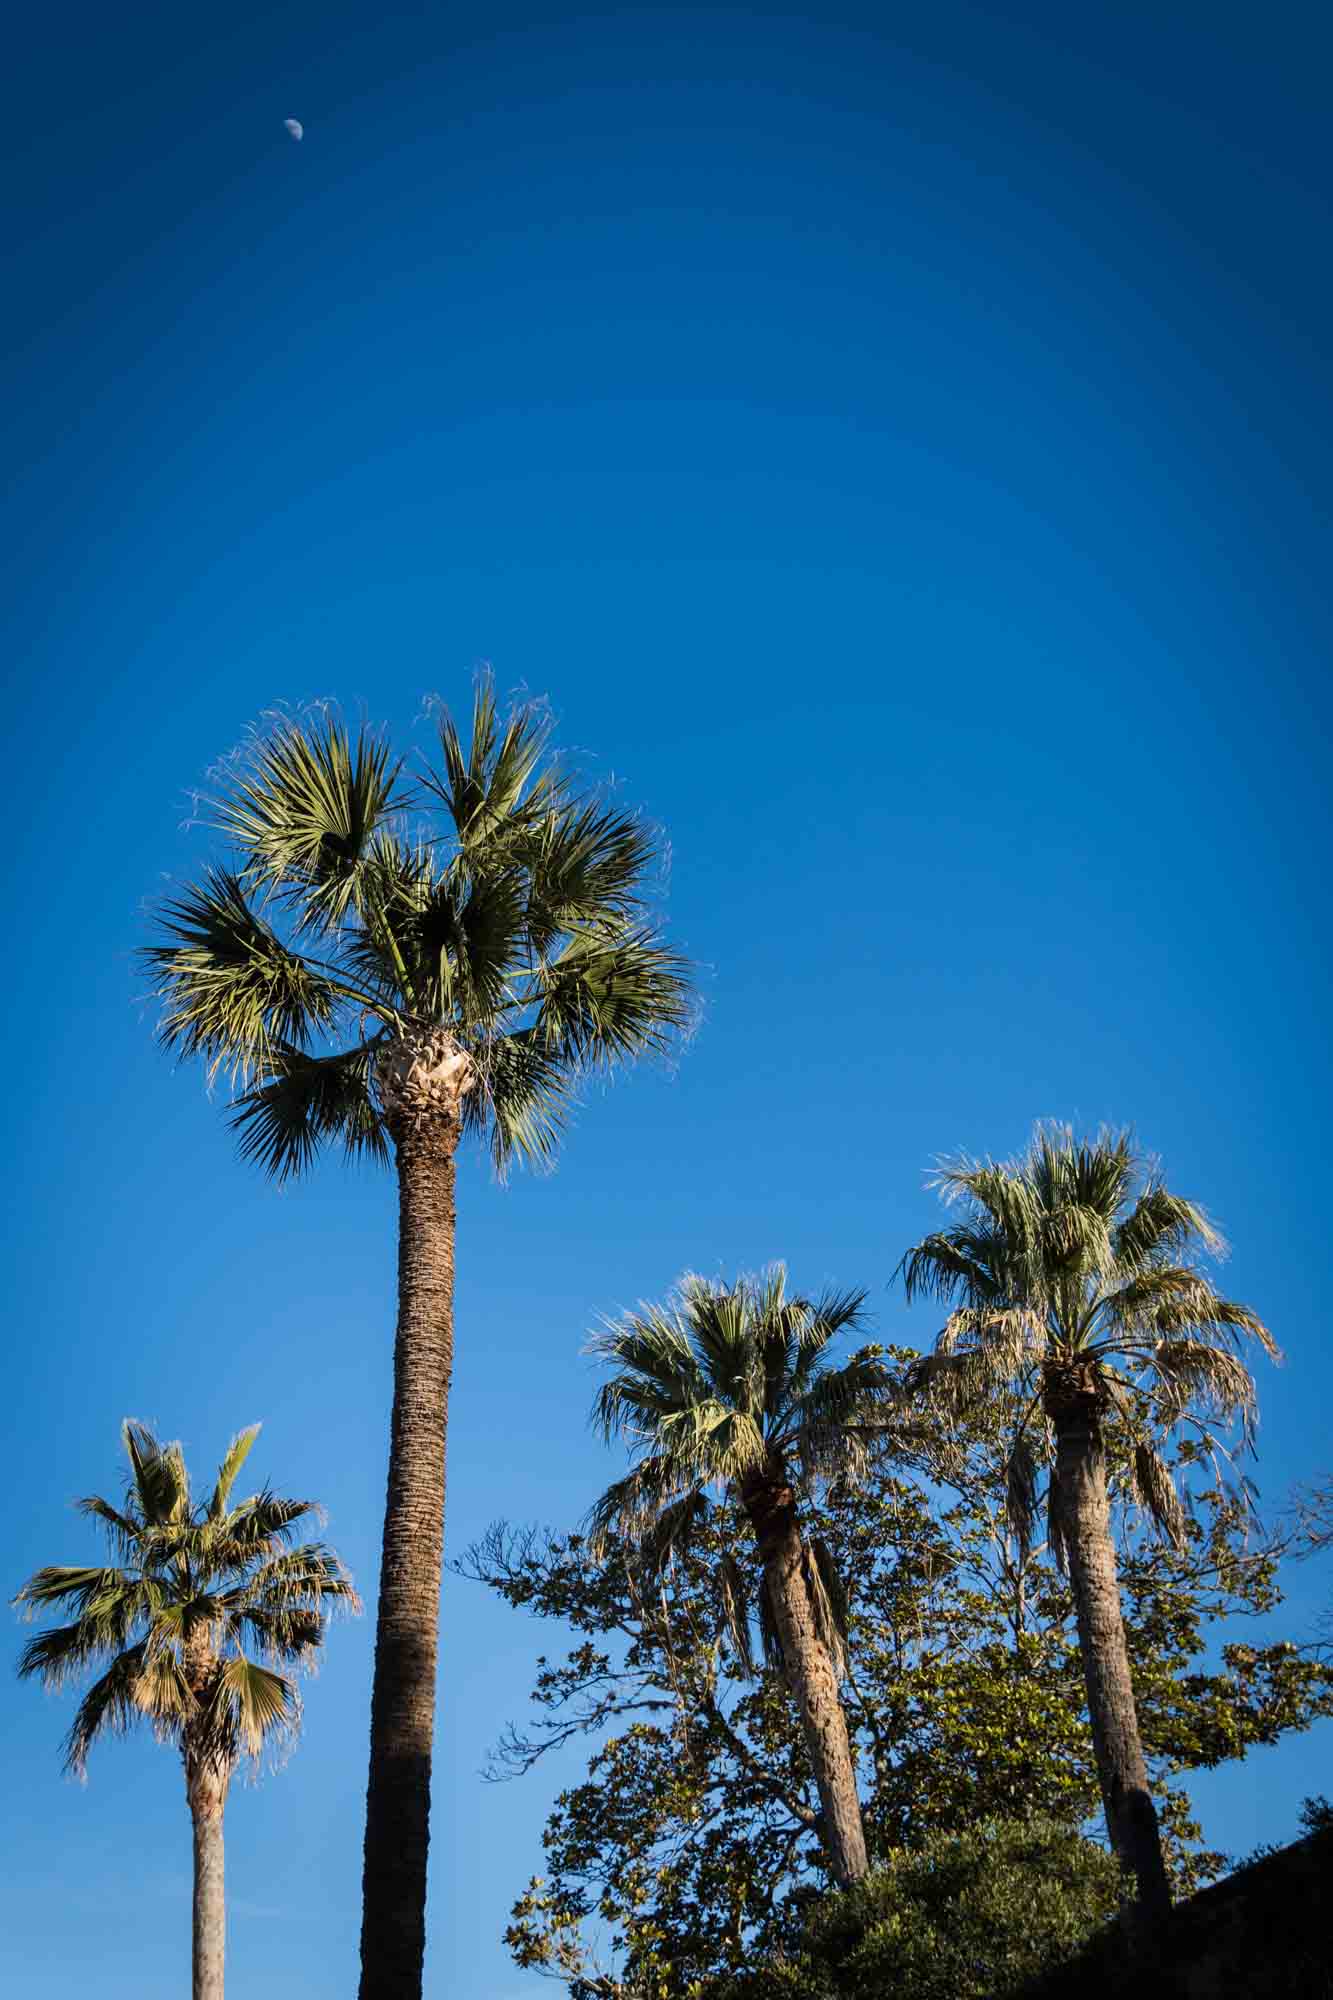 Palm trees against blue sky with moon in sky for an article on how to take photos at the McNay Art Museum